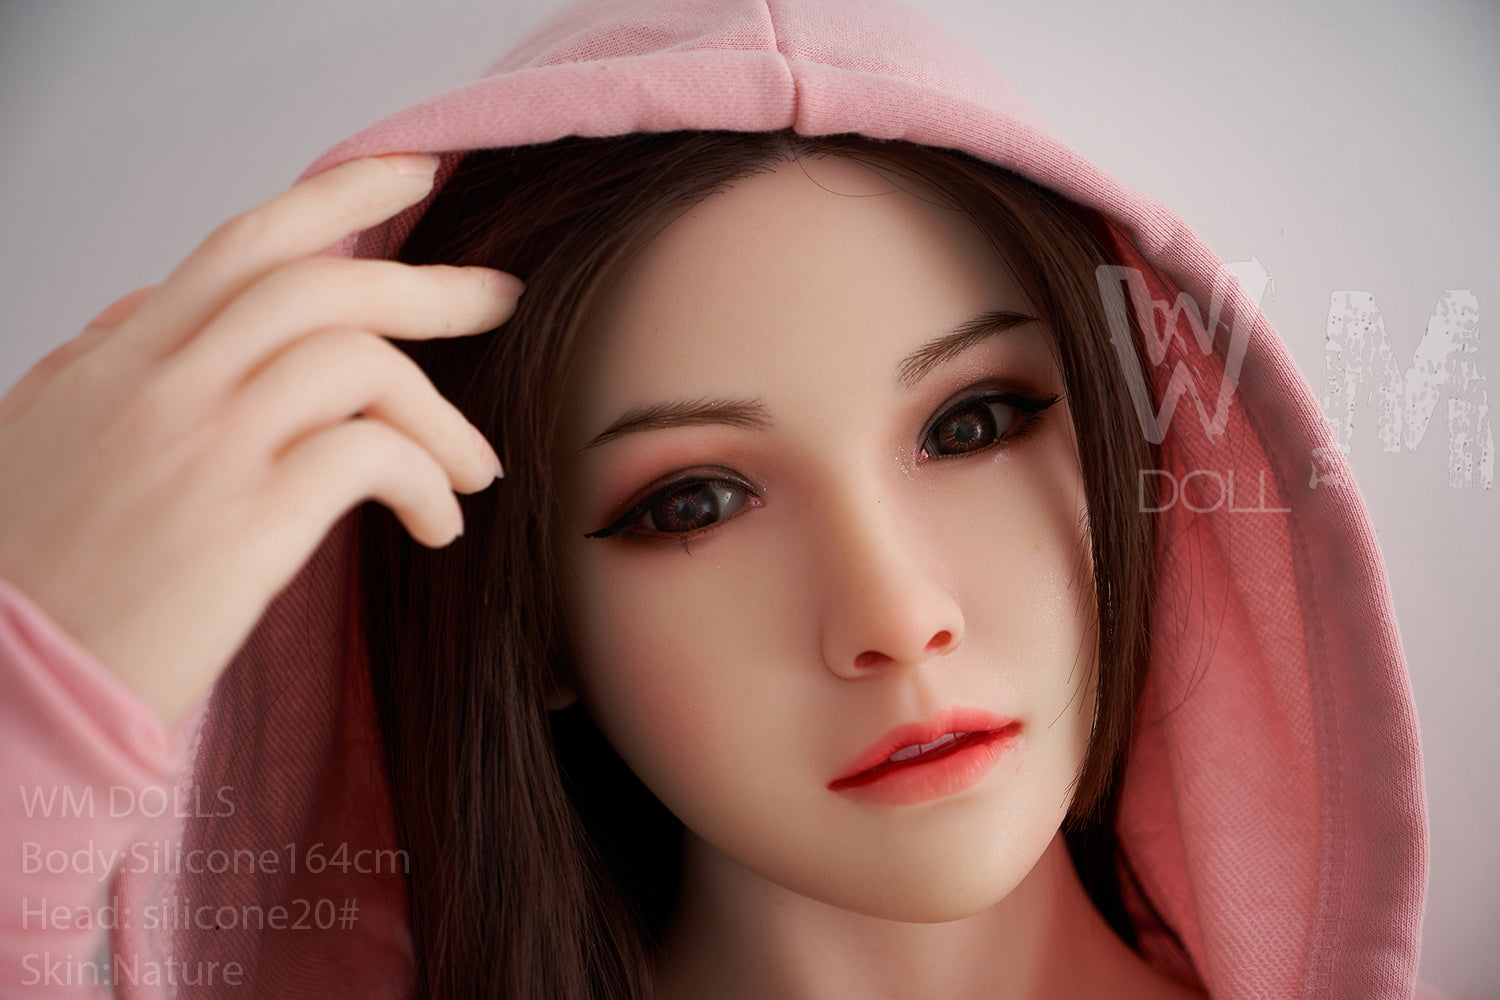 WM Doll 164 cm D Silicone - Maeve | Buy Sex Dolls at DOLLS ACTUALLY